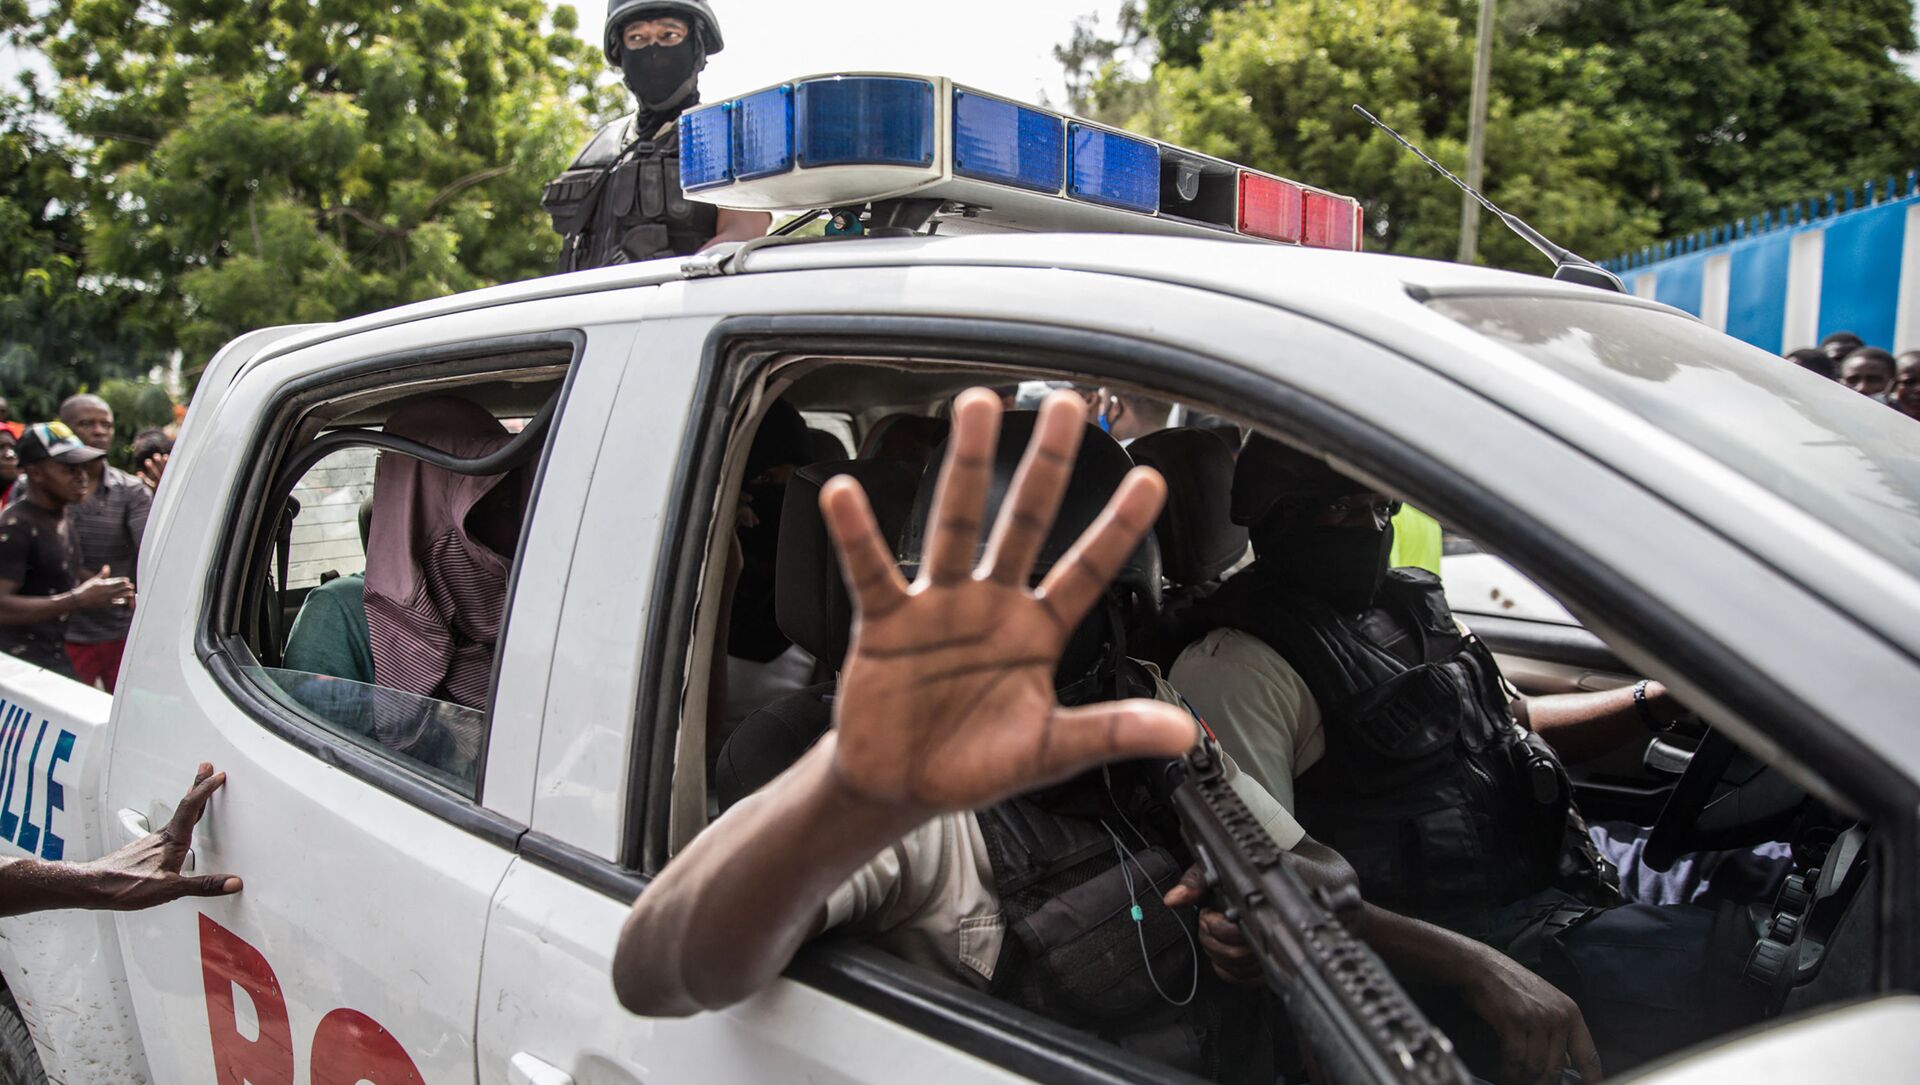 Two men, accused of being involved in the assassination of President Jovenel Moise, are being transported to the Petionville station in a police car in Port au Prince on July 8, 2021 - Sputnik International, 1920, 10.07.2021